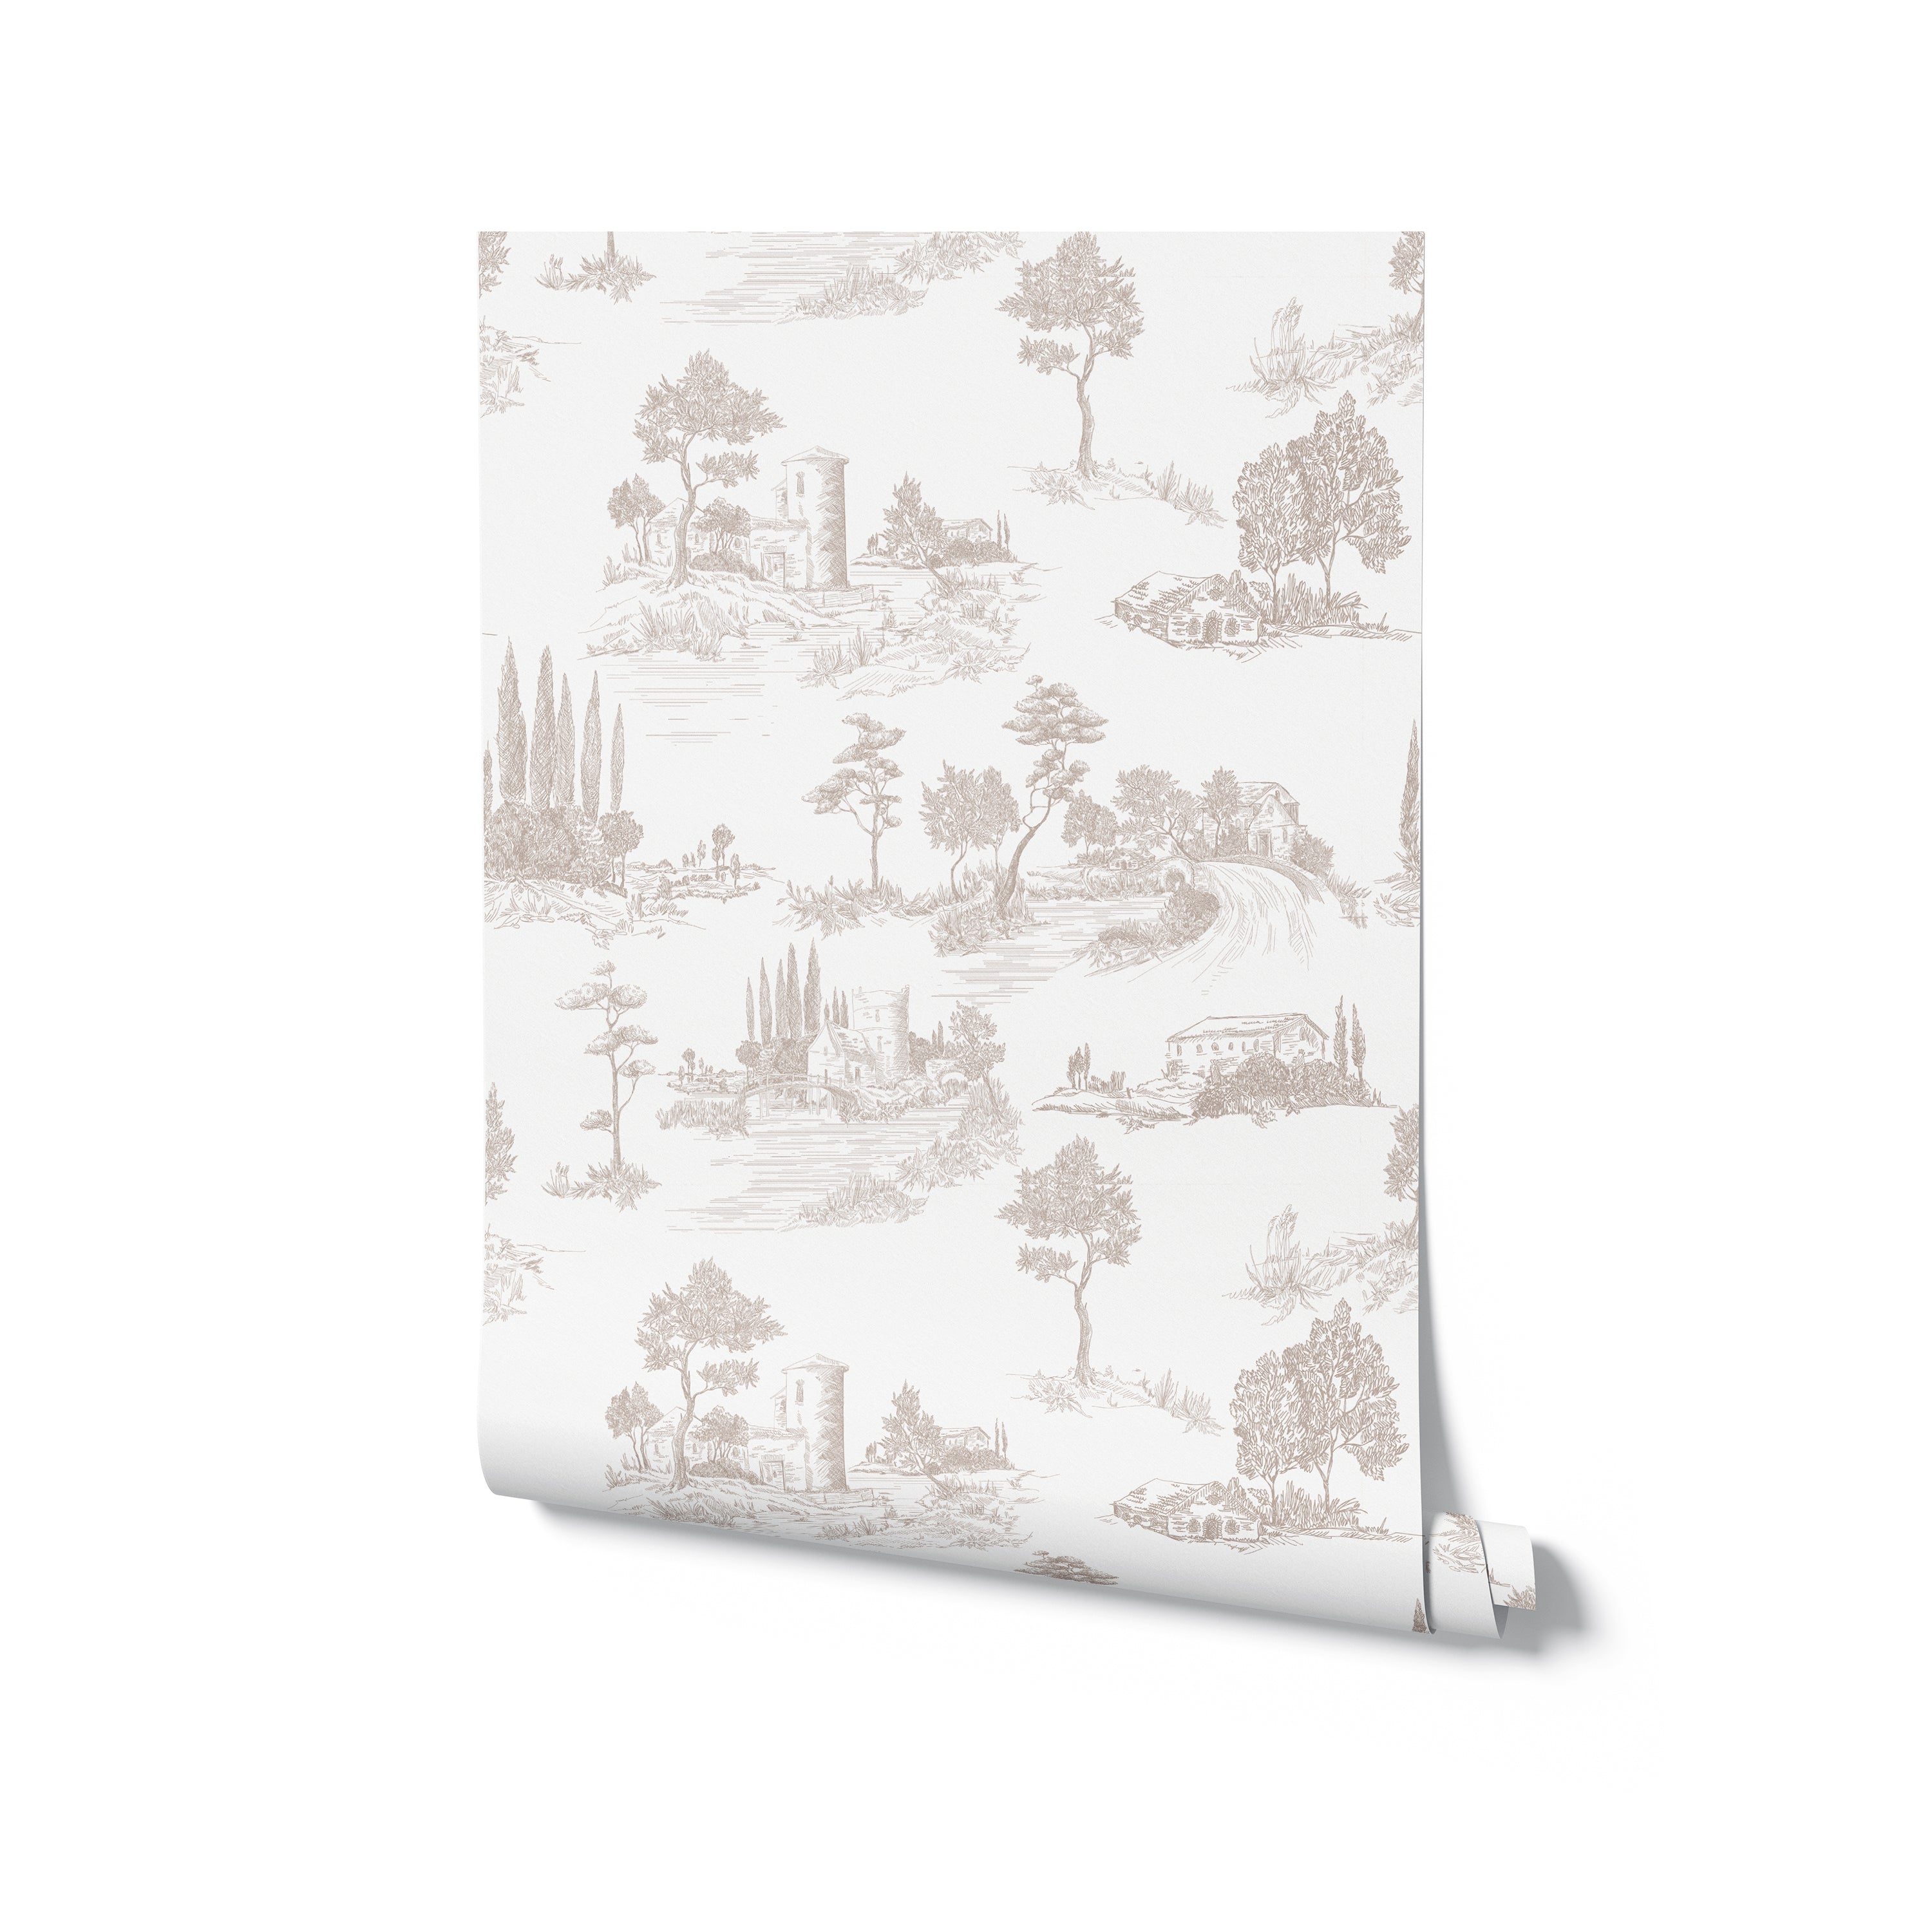 A side view of the Farmhouse Toile Wallpaper roll partially unrolled, displaying the intricate toile pattern that captures bucolic life in fine detail, set against a light background that emphasizes the pastoral and tranquil theme of the design.